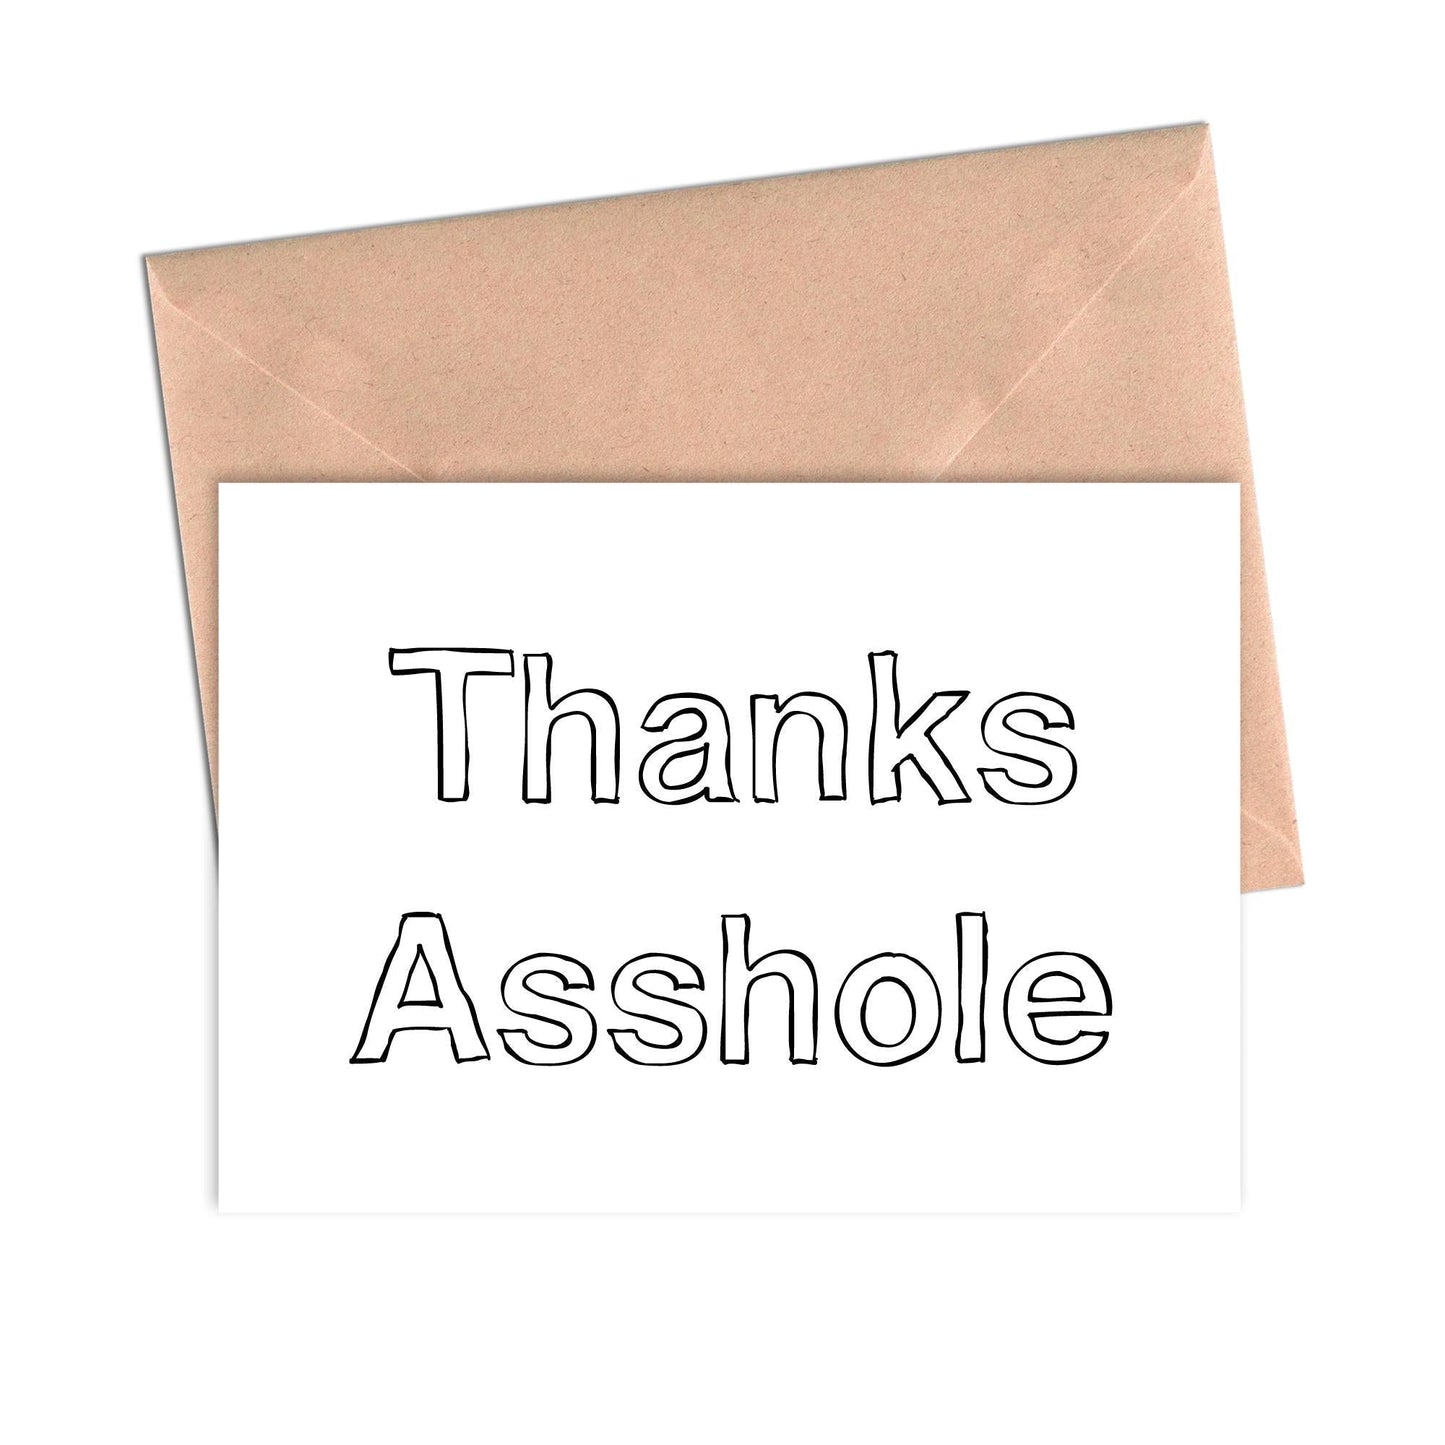 Thanks Asshole Funny Card-Friendship Cards-Crimson and Clover Studio